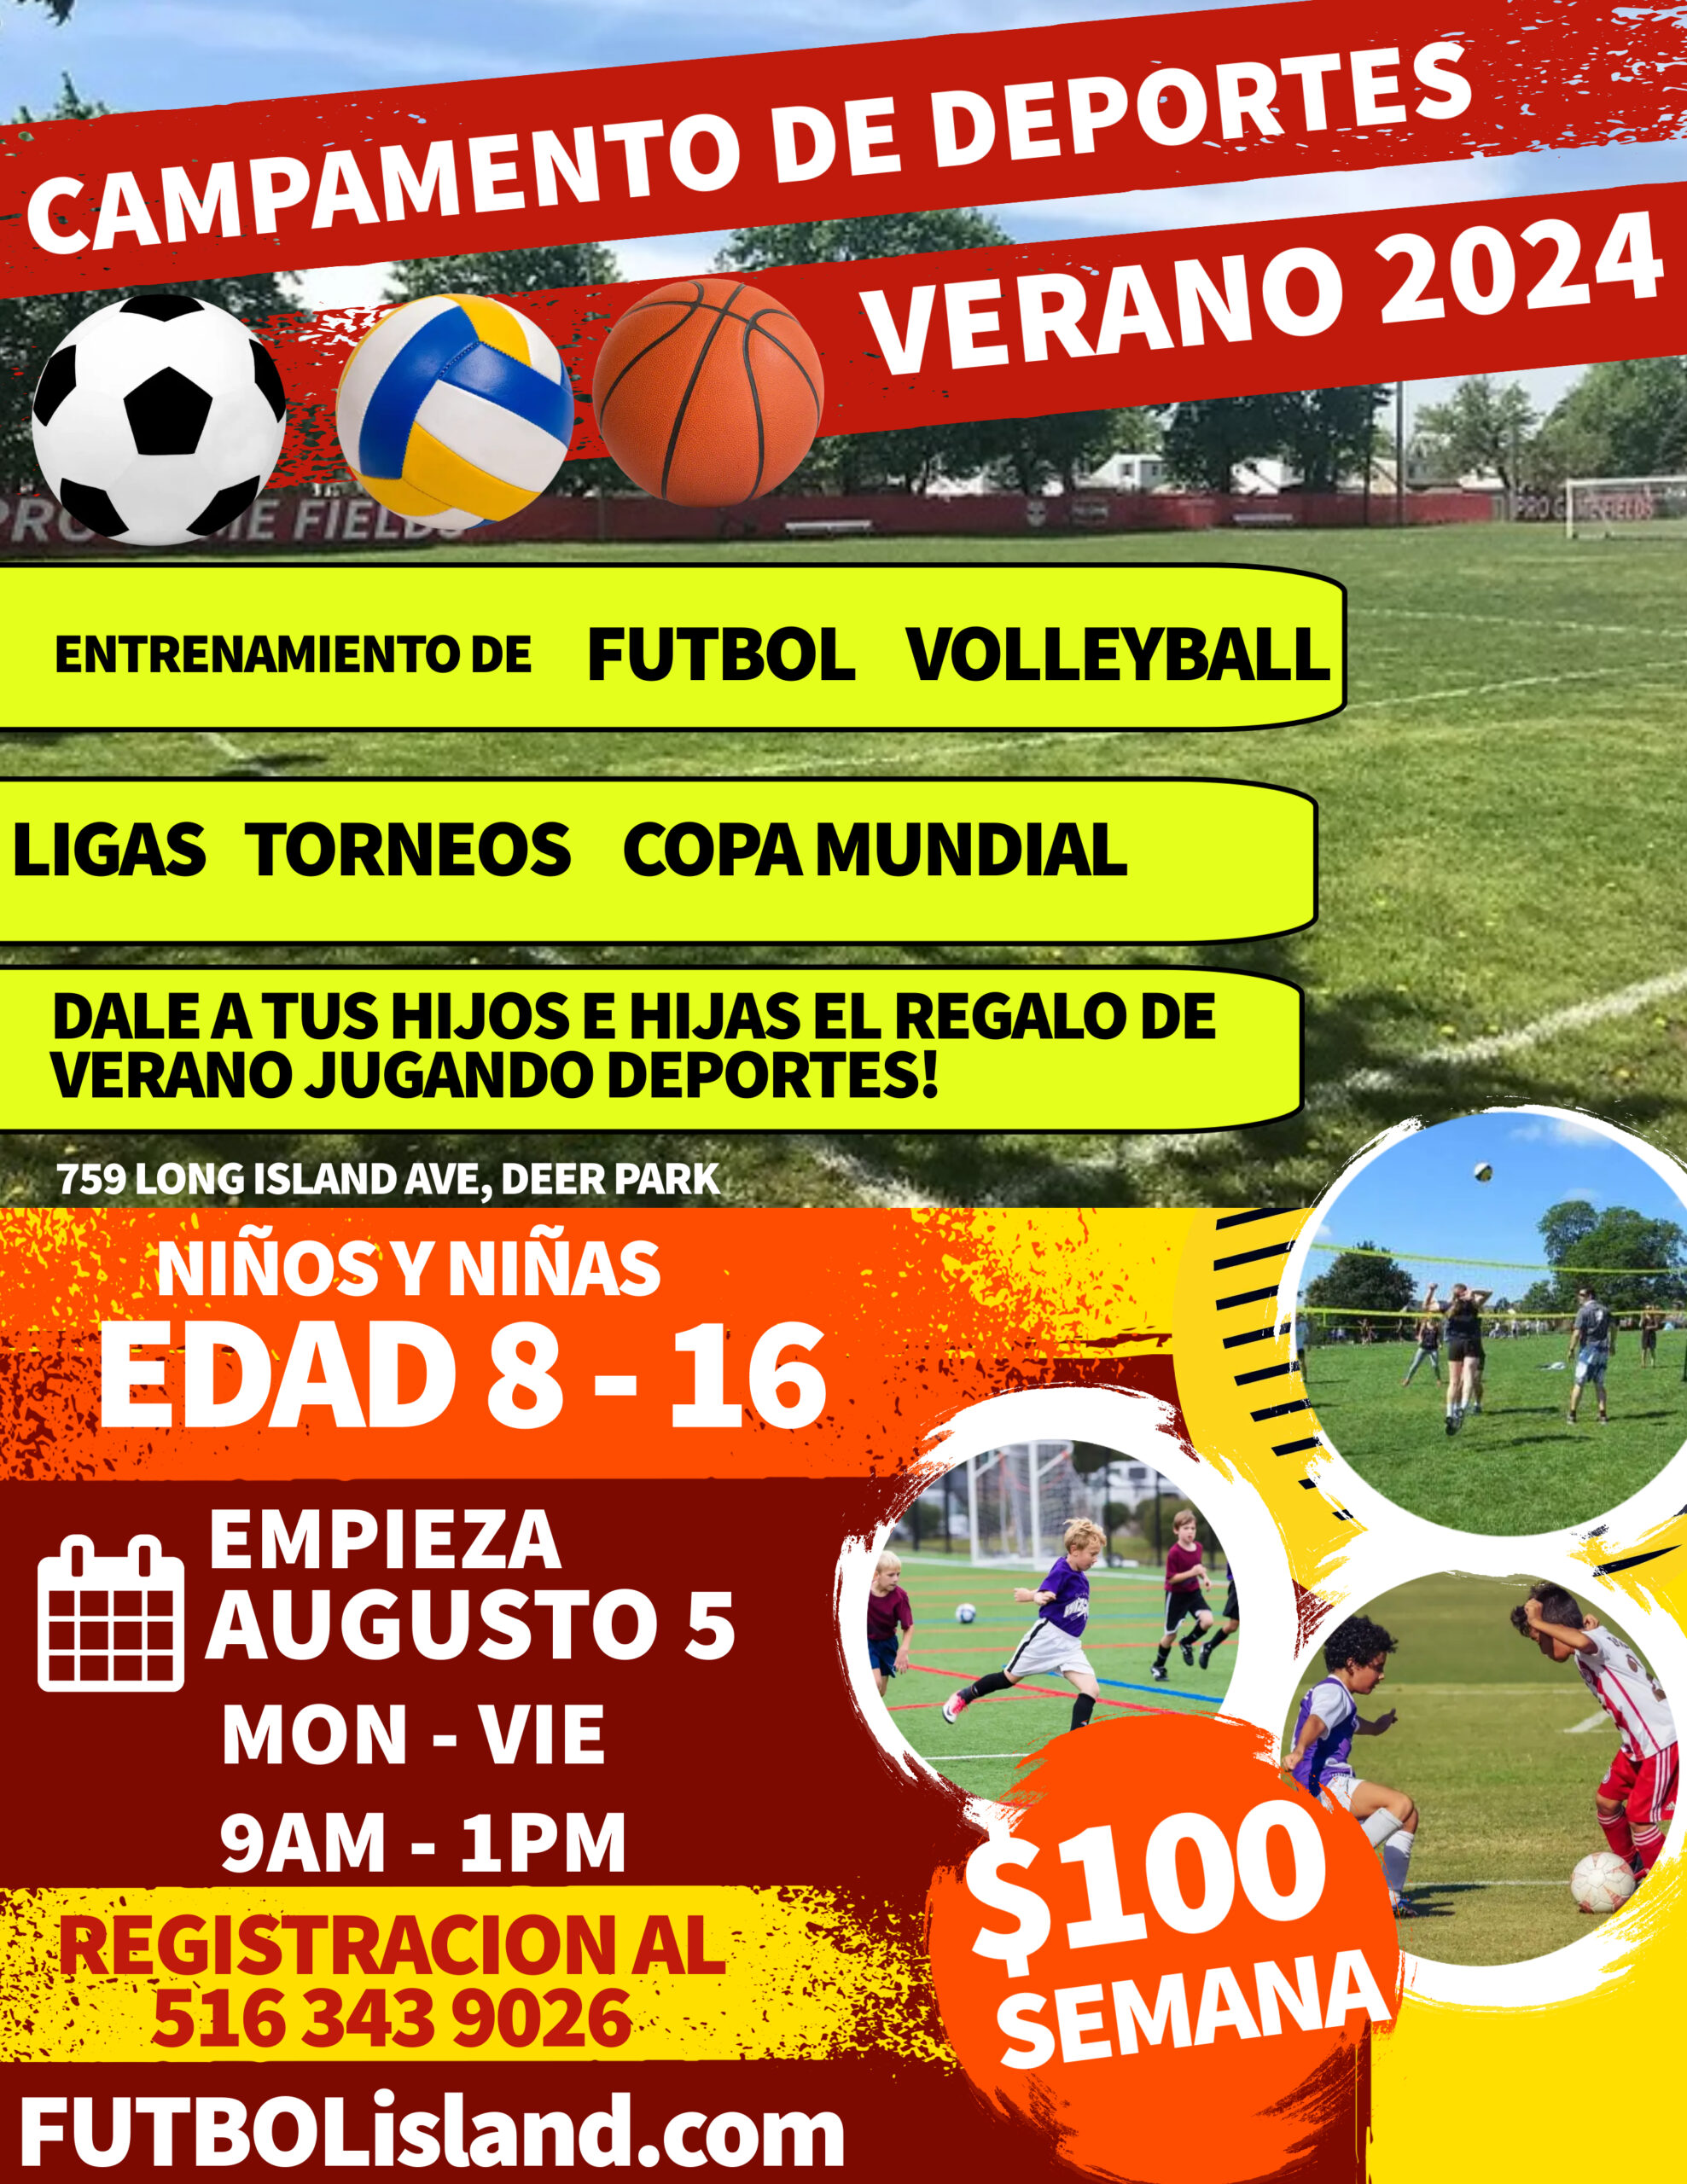 Youth Soccer Camp Flyer Template (1)_1715199079361